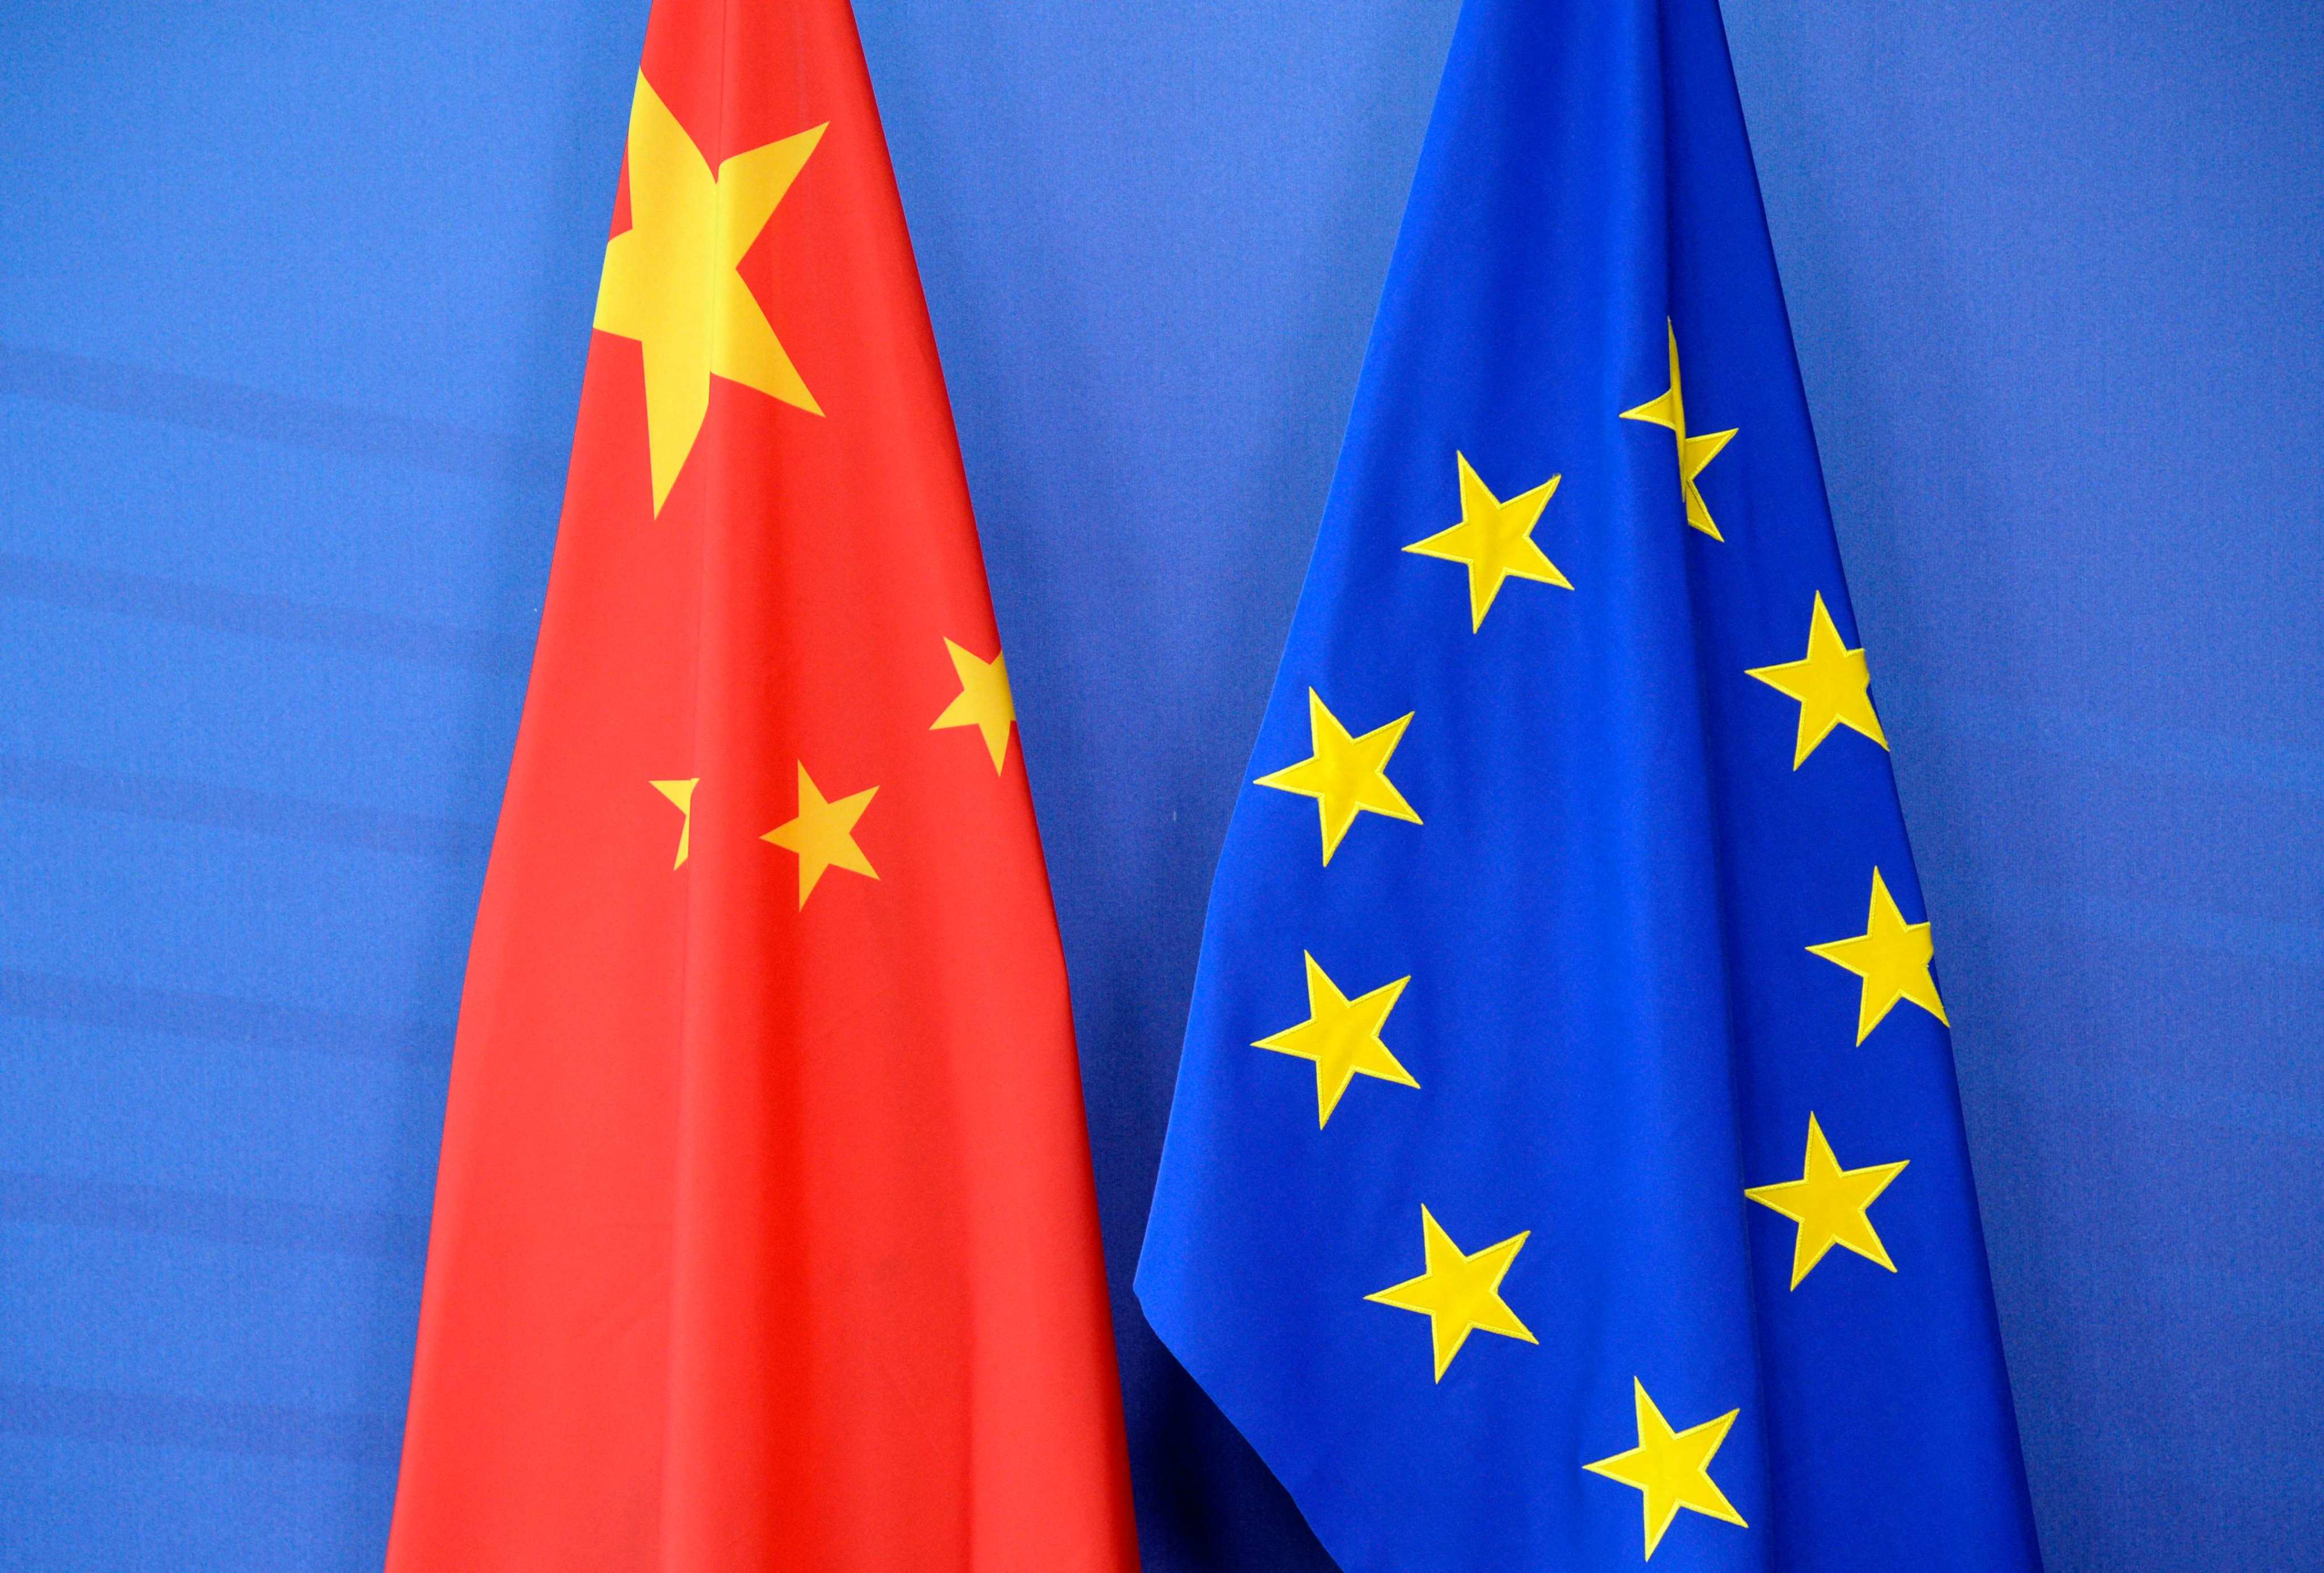 The EU Chamber of Commerce in China is calling for more dialogue between Brussels and Beijing to de-escalate geopolitical tensions. Photo: AFP